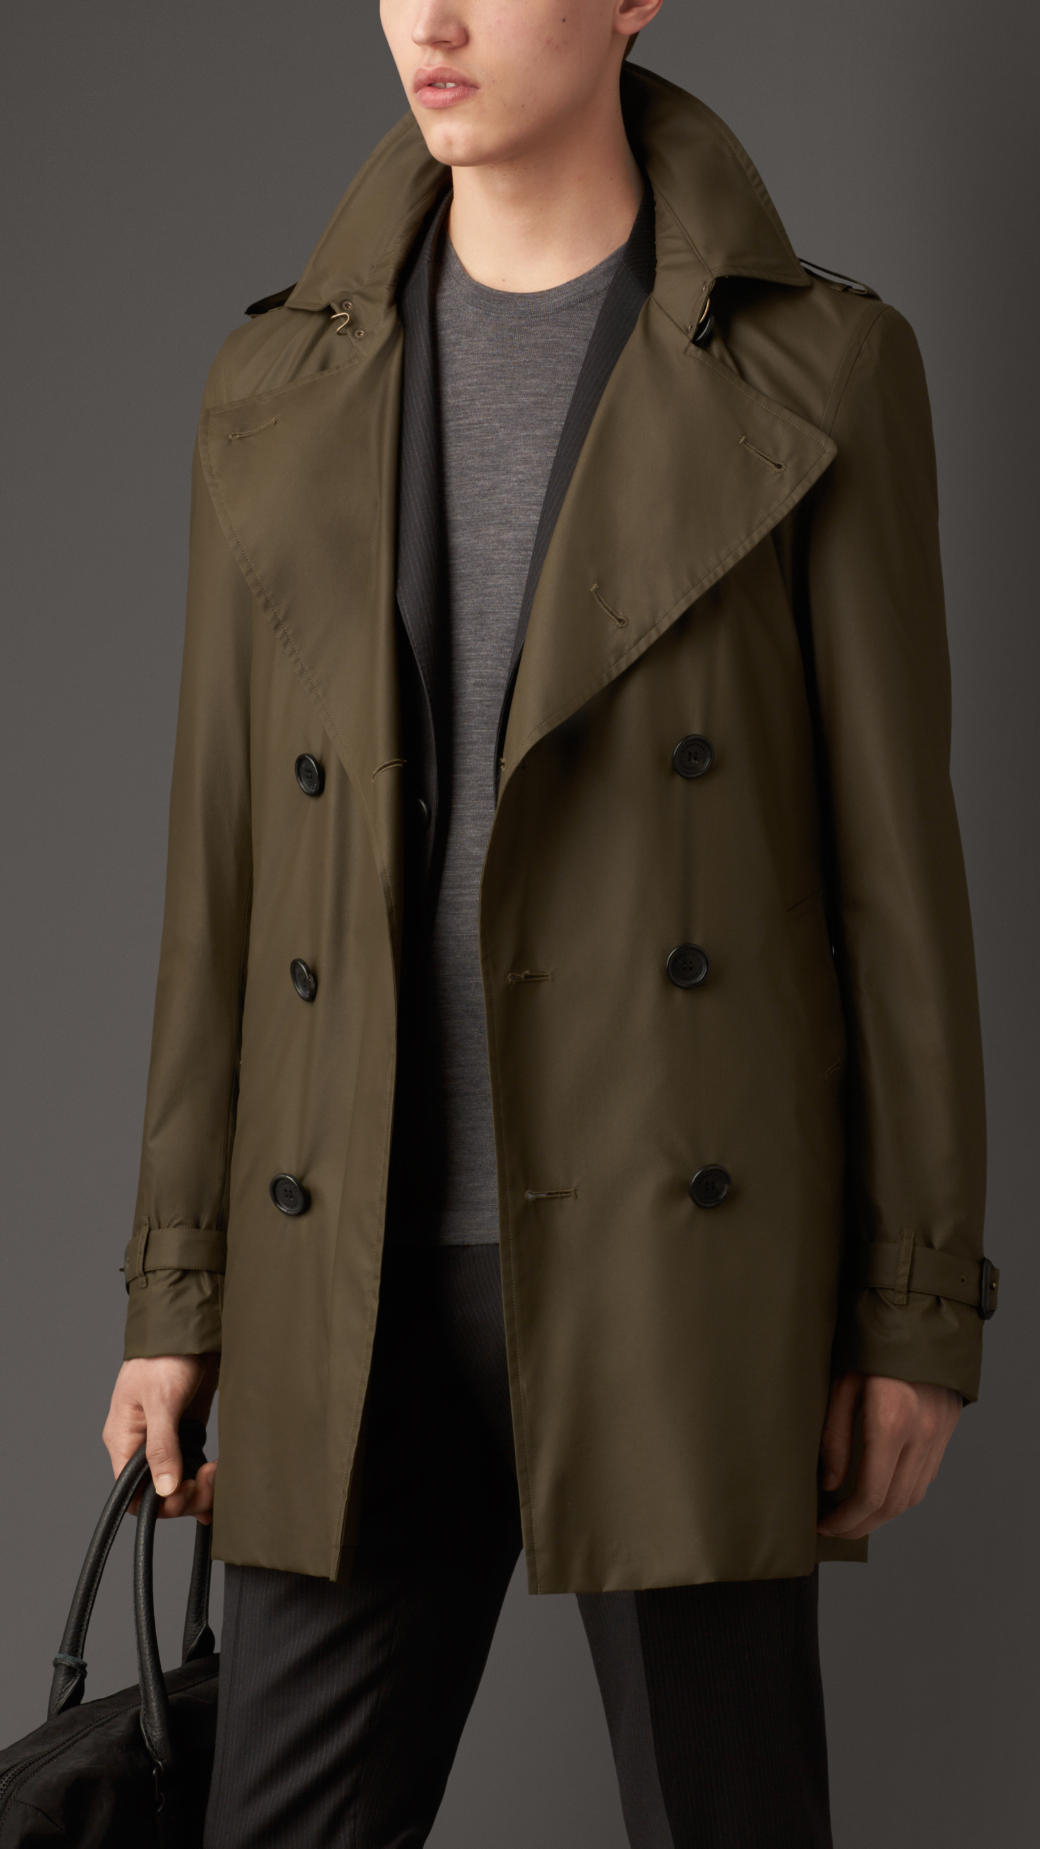 Lyst - Burberry Showerproof Technical Fabric Trench Coat in Green for Men